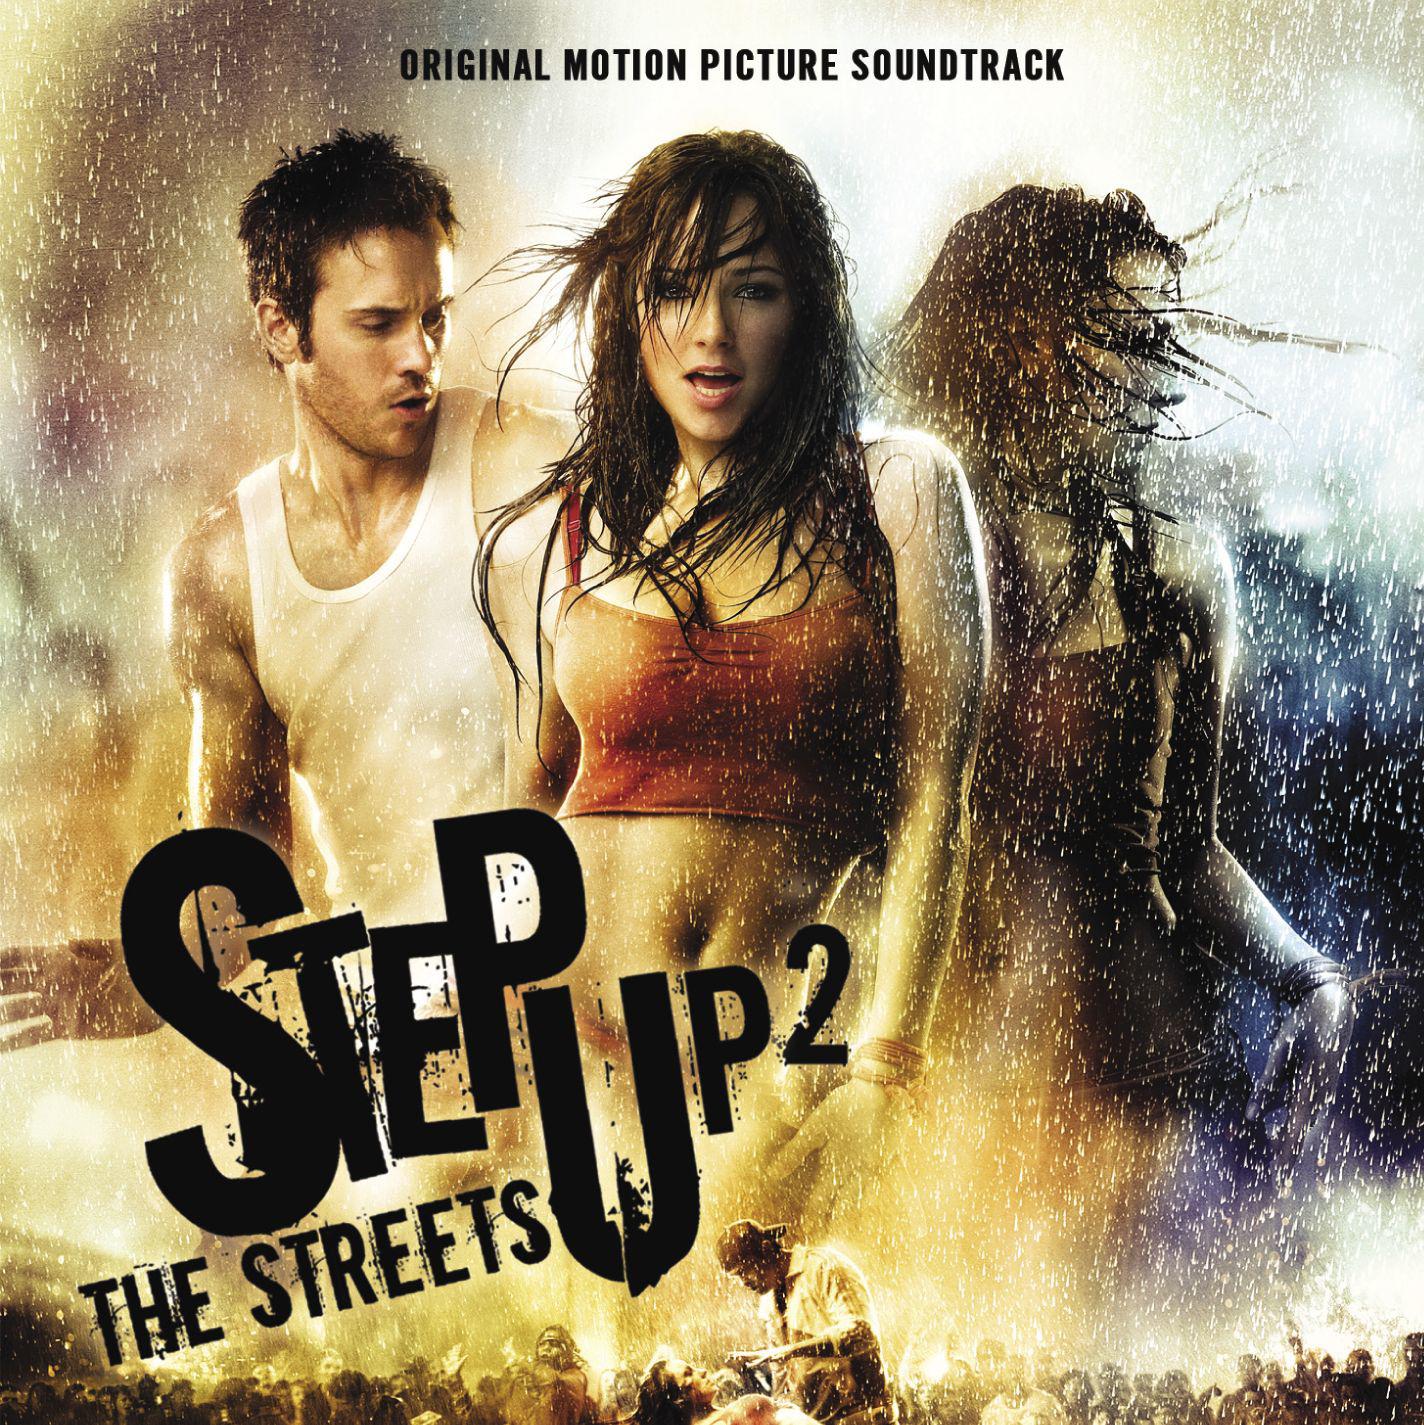 Low (feat. T-Pain) [Step Up 2 the Streets O.S.T. Version]歌词 歌手Flo Rida / T-Pain-专辑Step Up 2 The Streets Original Motion Picture Soundtrack - (舞出我人生2 电影原声)-单曲《Low (feat. T-Pain) [Step Up 2 the Streets O.S.T. Version]》LRC歌词下载